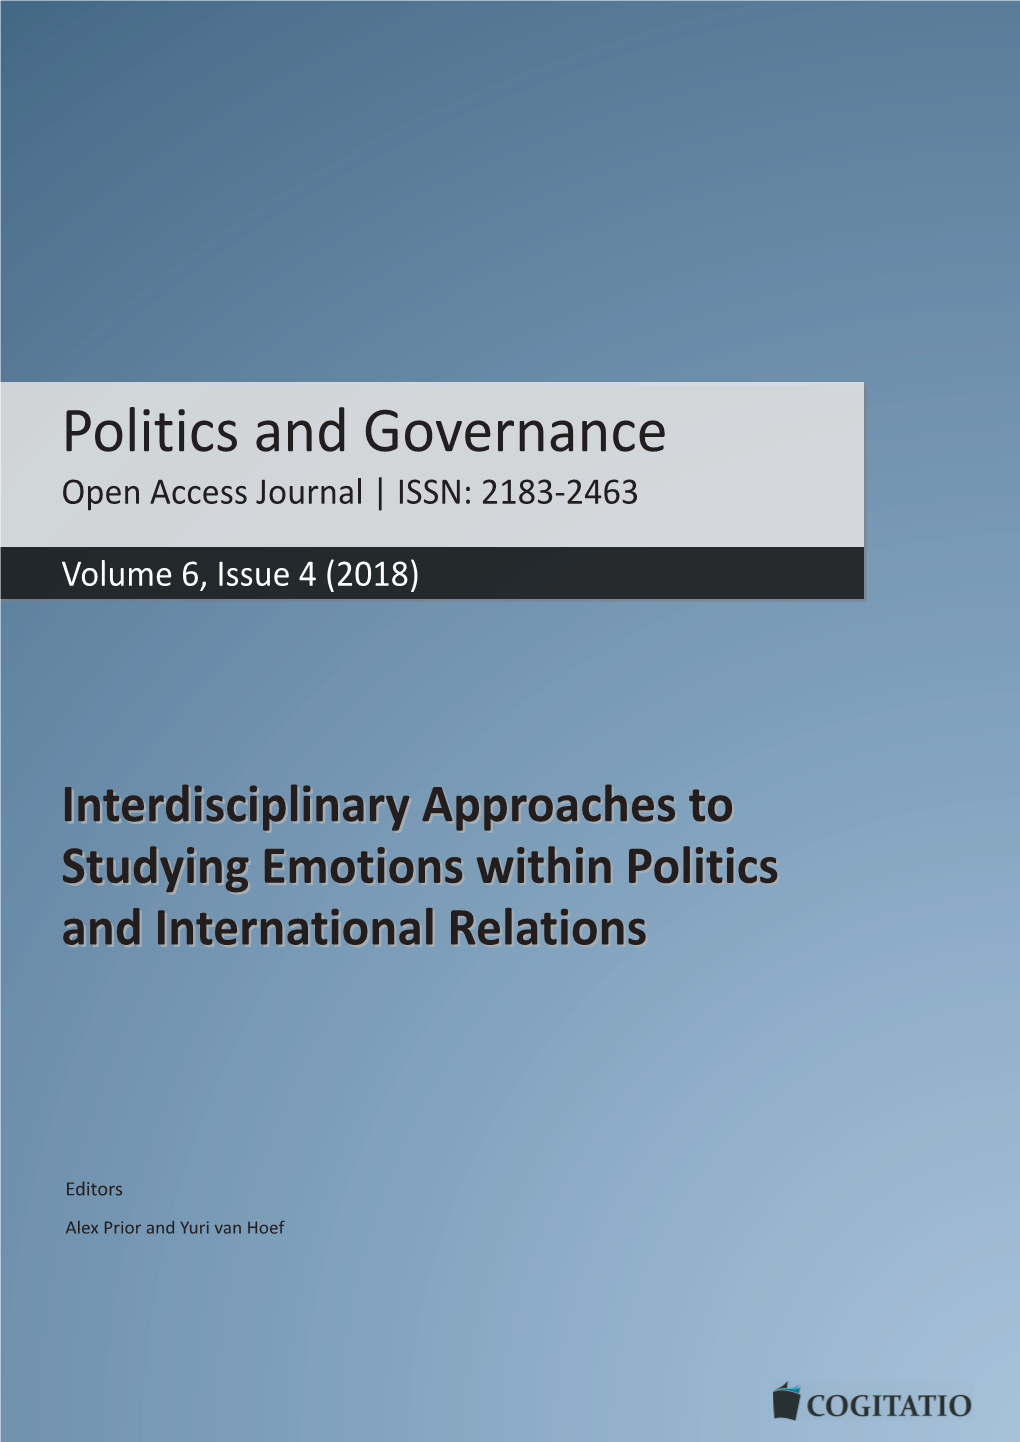 Emotions and Political Narratives: Populism, Trump and Trade Amy Skonieczny 62–72